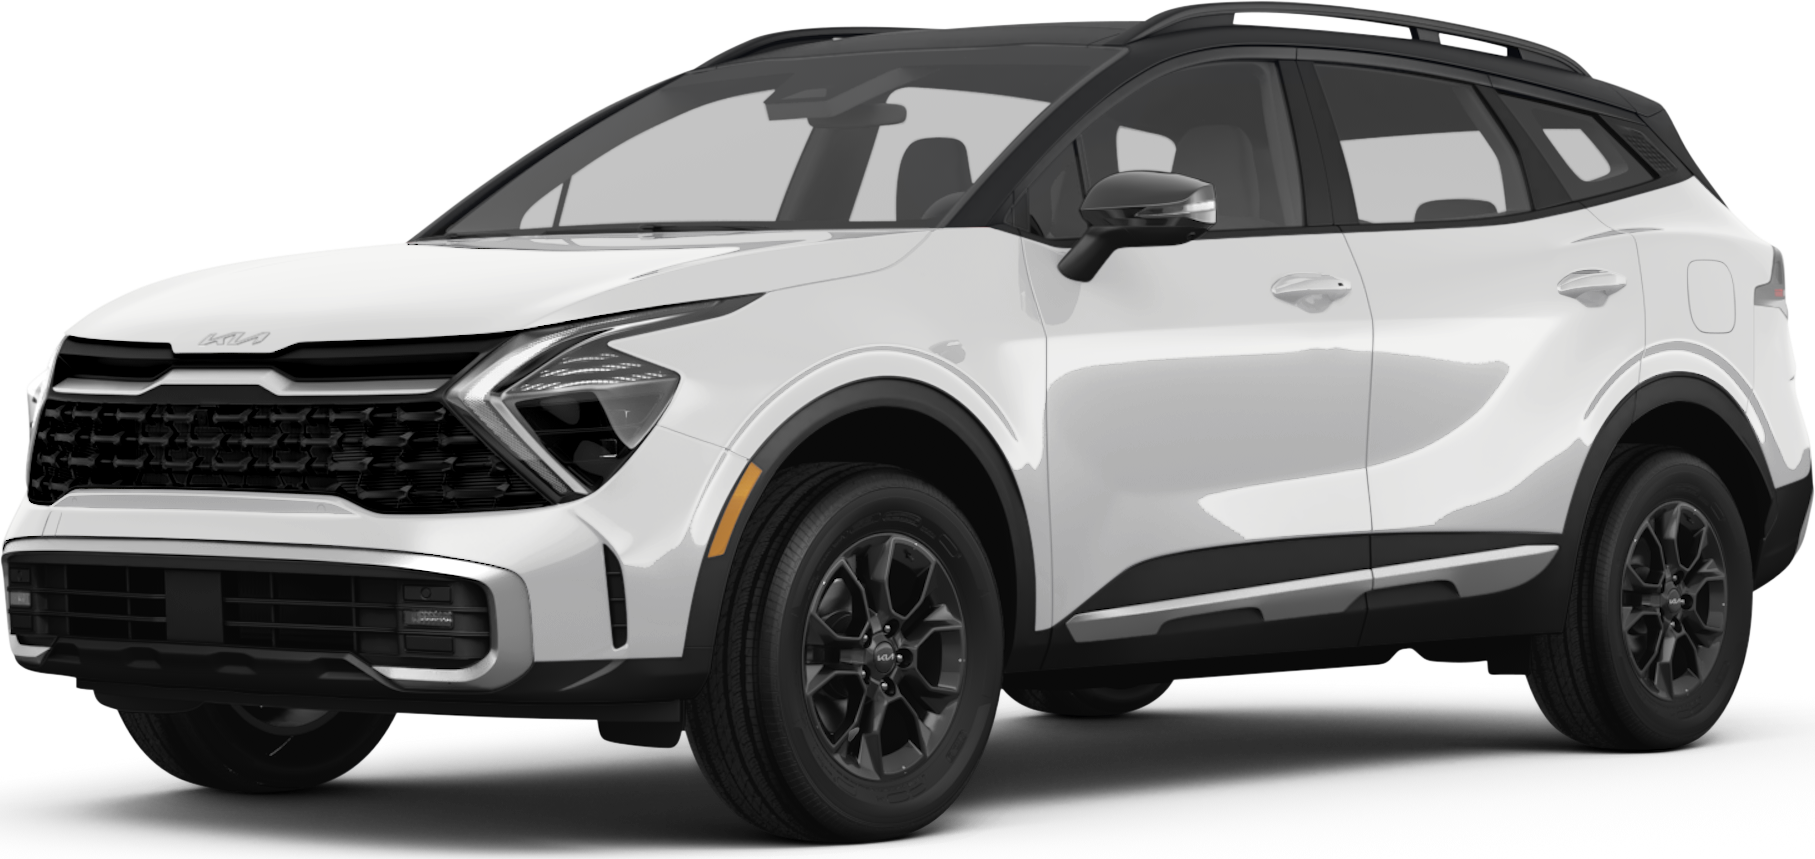 https://file.kelleybluebookimages.com/kbb/base/evox/CP/53393/2024-Kia-Sportage-front_53393_032_1815x859_US1_cropped.png